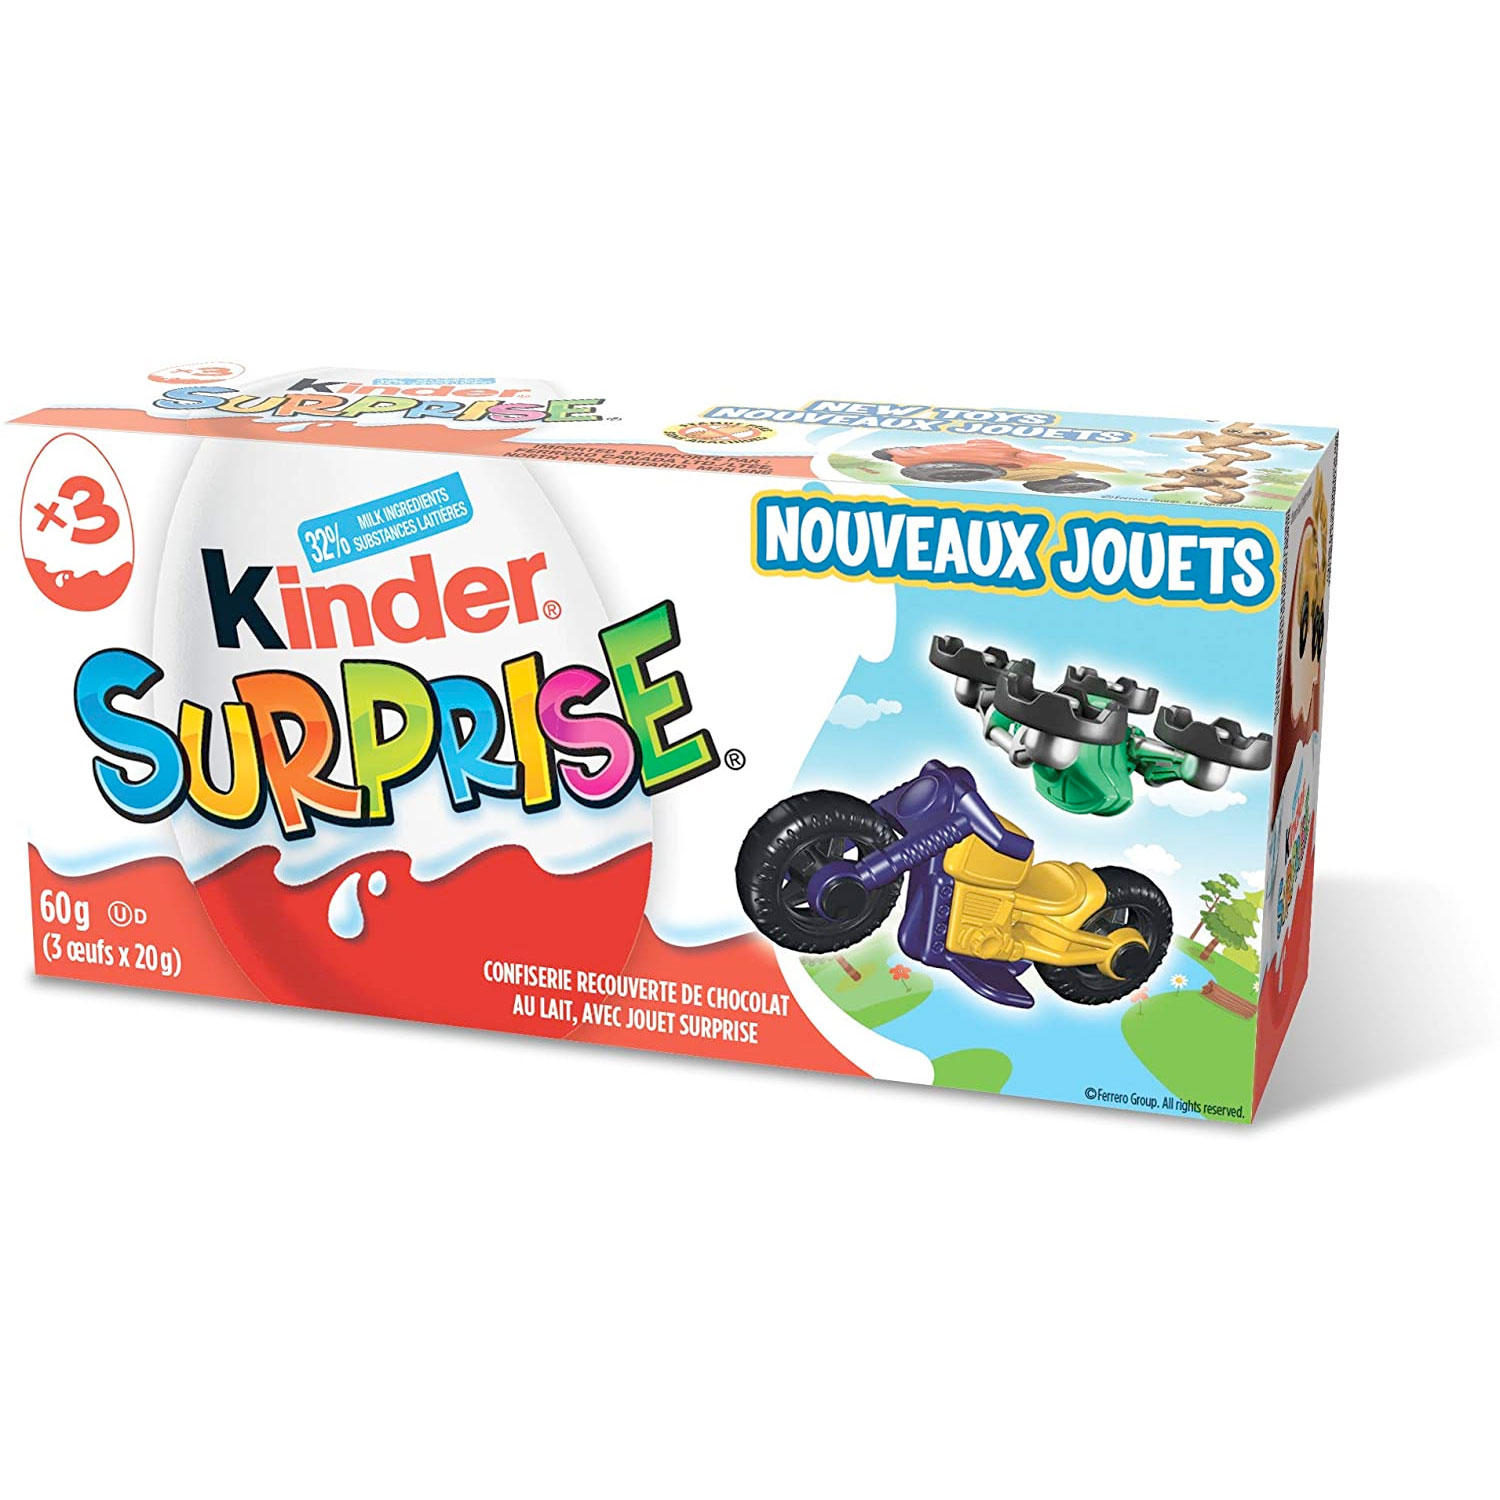 Amazon：Kinder Surprise Chocolate Eggs with Toys (3 Count)只賣$3.47